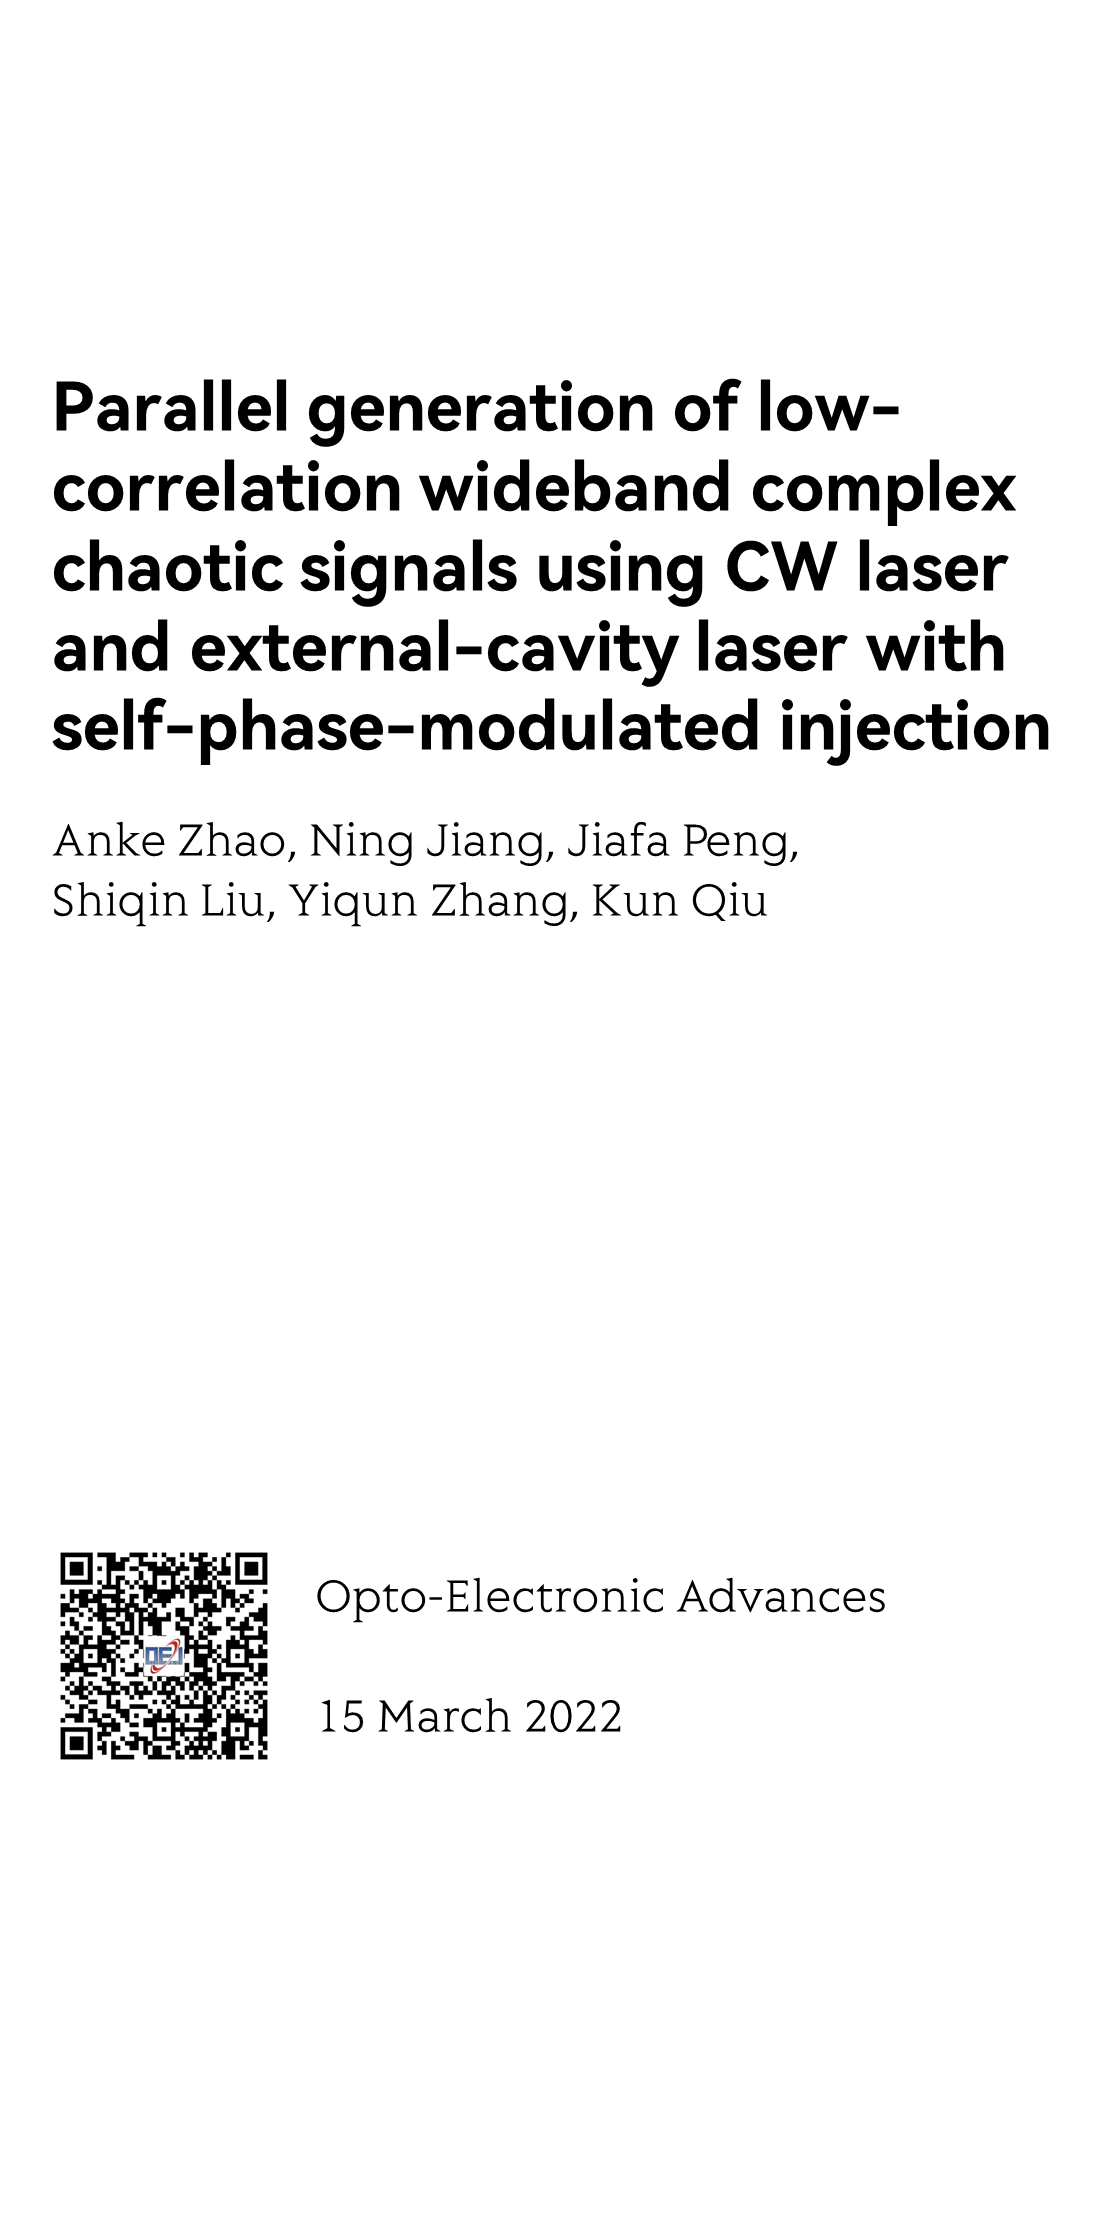 Parallel generation of low-correlation wideband complex chaotic signals using CW laser and external-cavity laser with self-phase-modulated injection_1